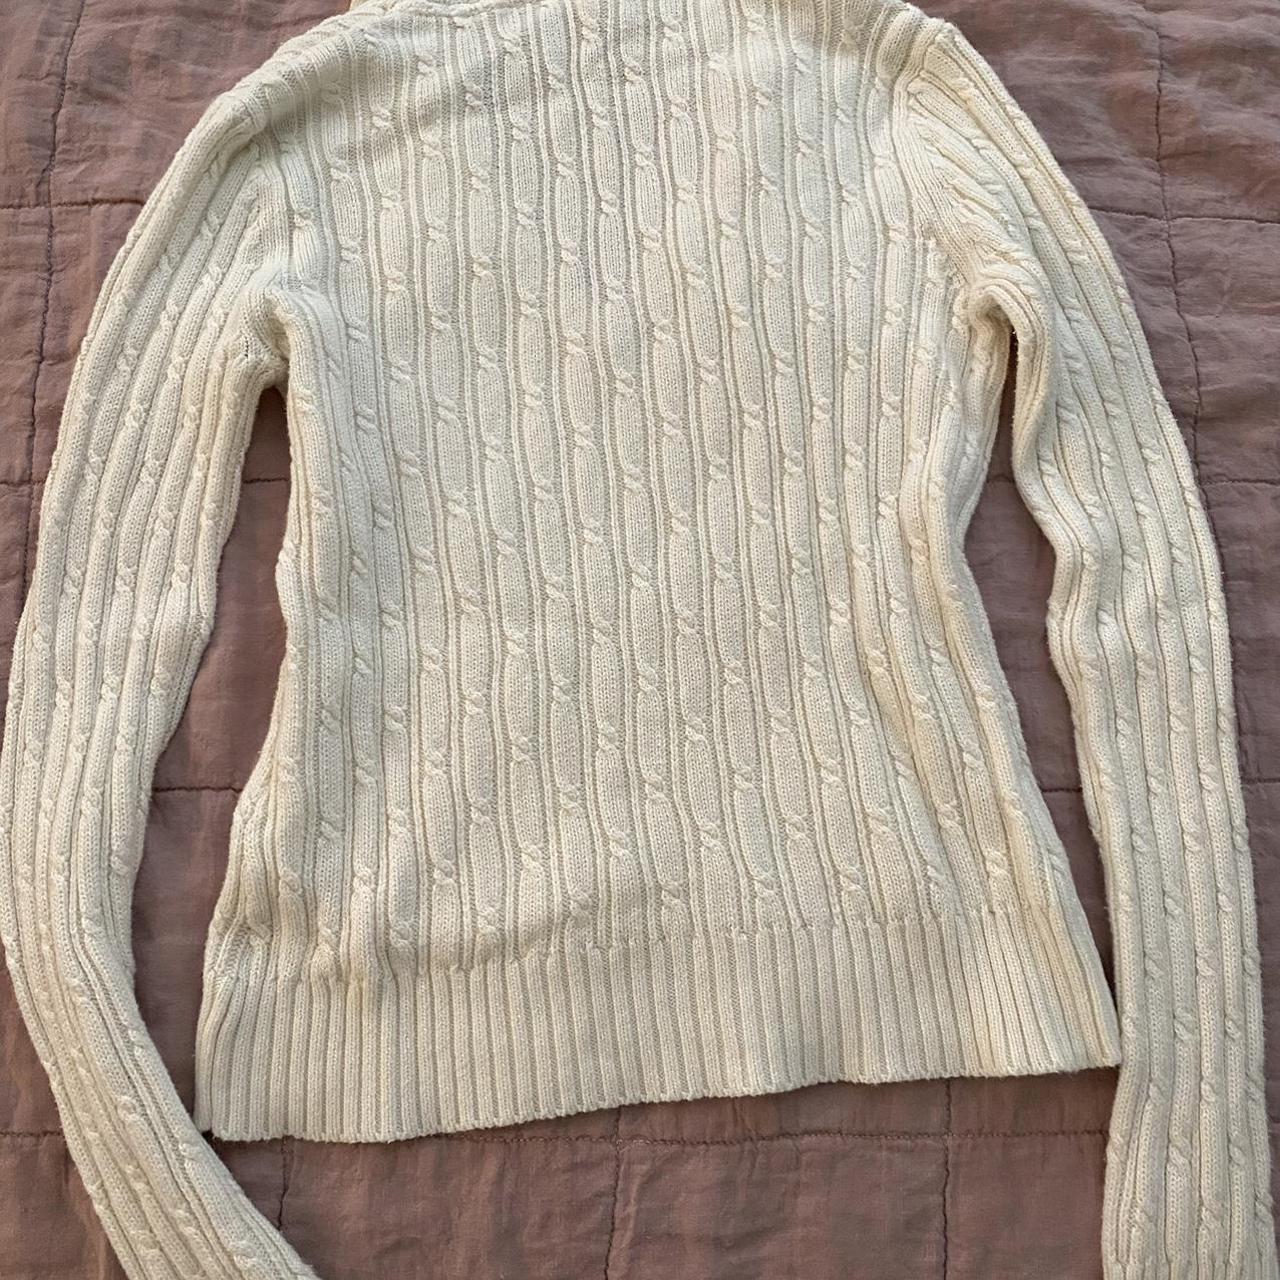 White knit sweater with hood - Depop